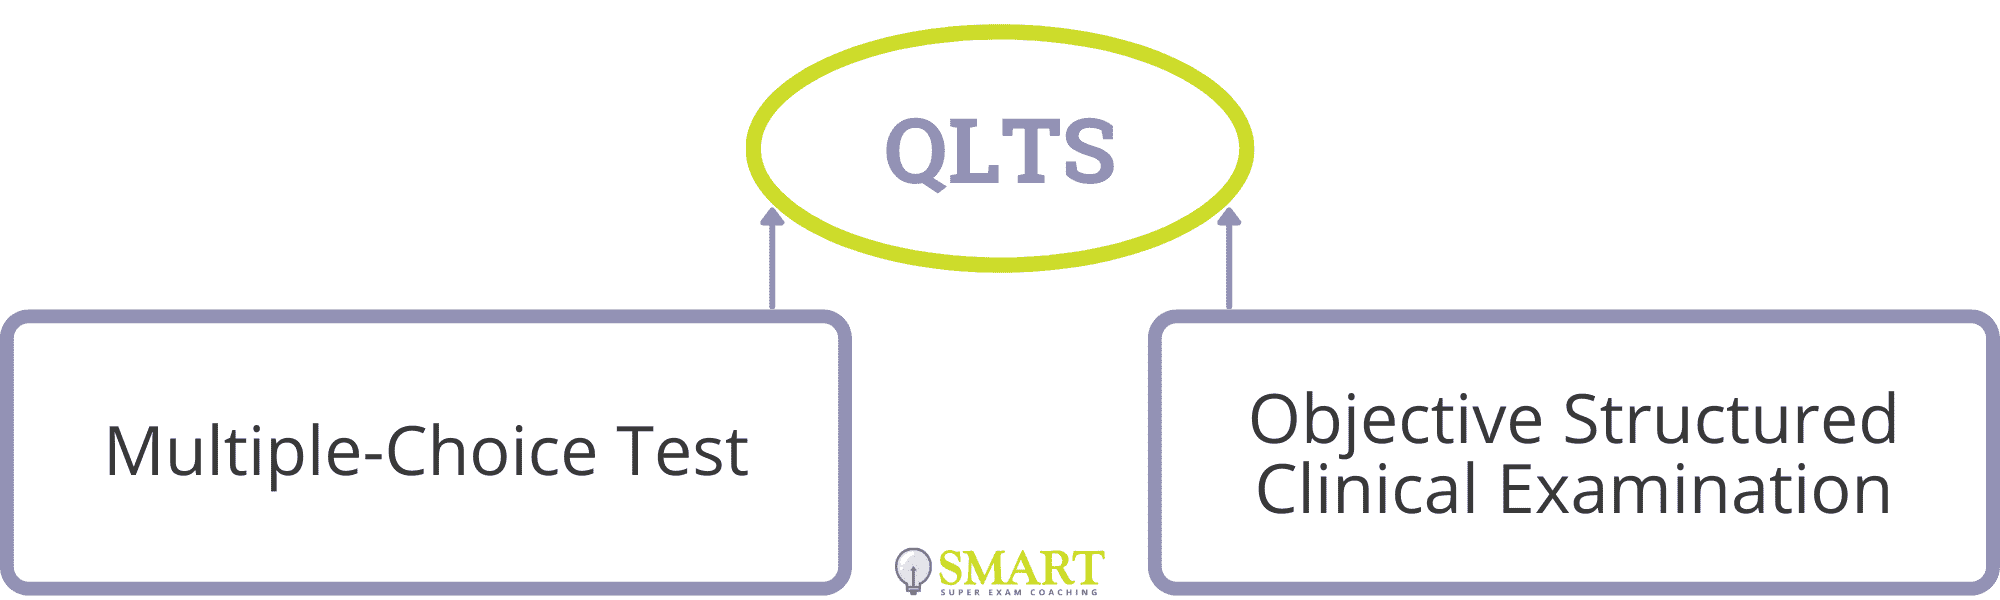 Qualified Lawyers Transfer Scheme (QLTS): Two Parts